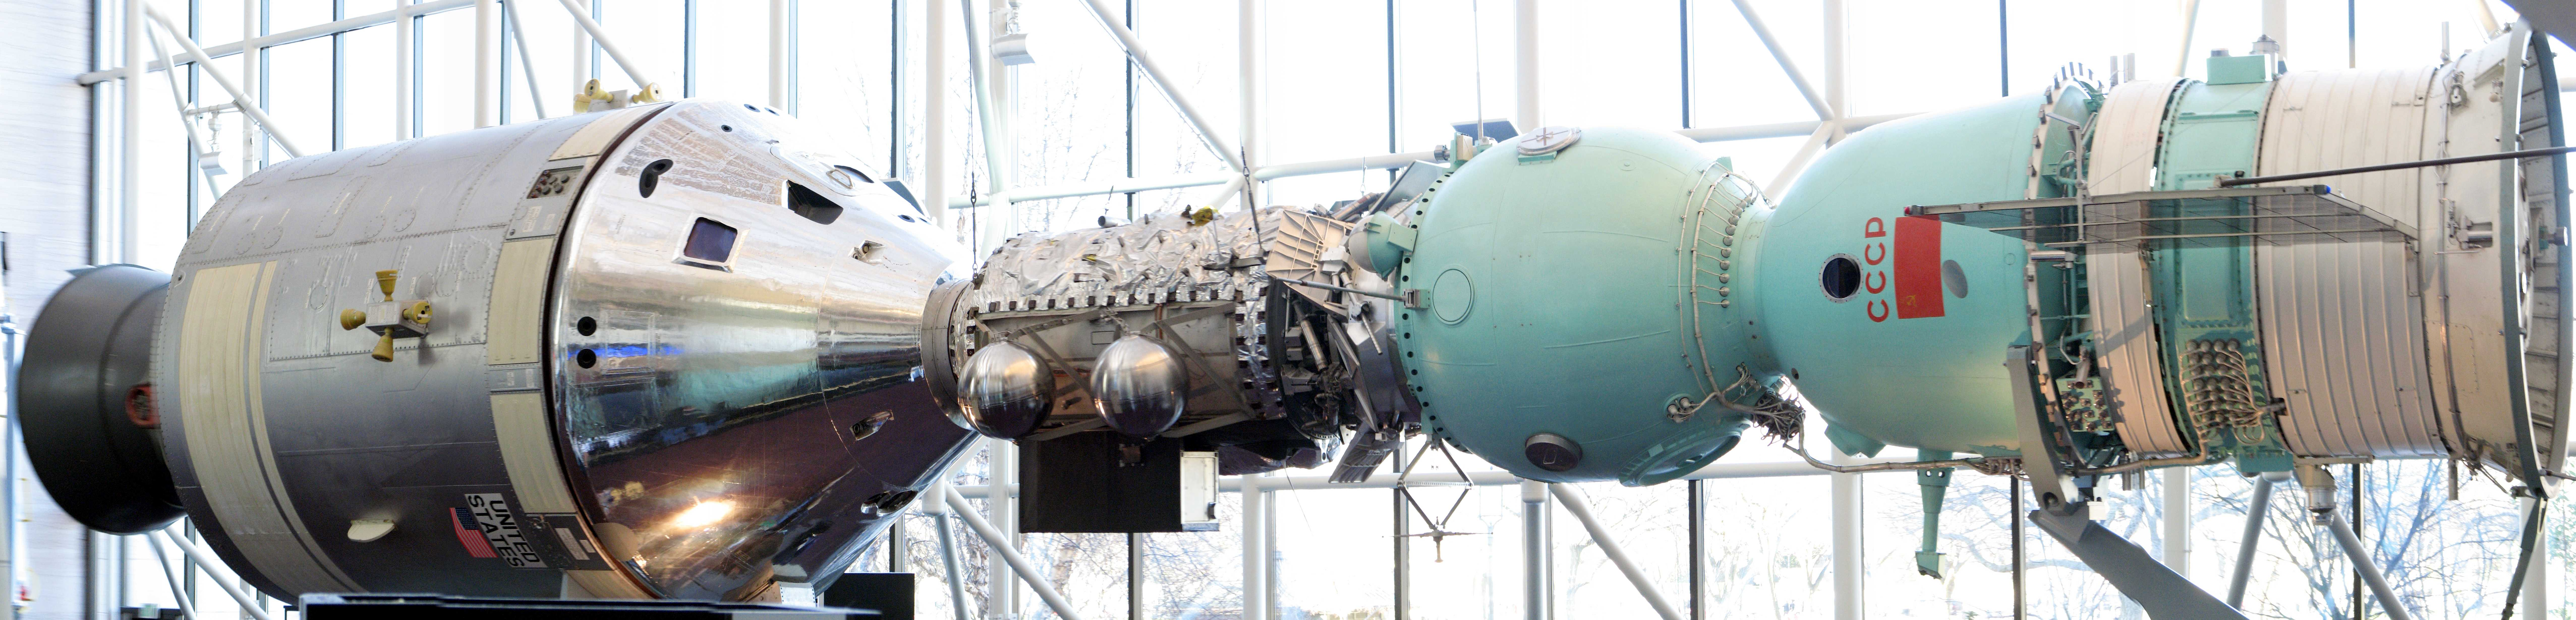 Apollo-Soyuz Test Project launches with SAM Experiment